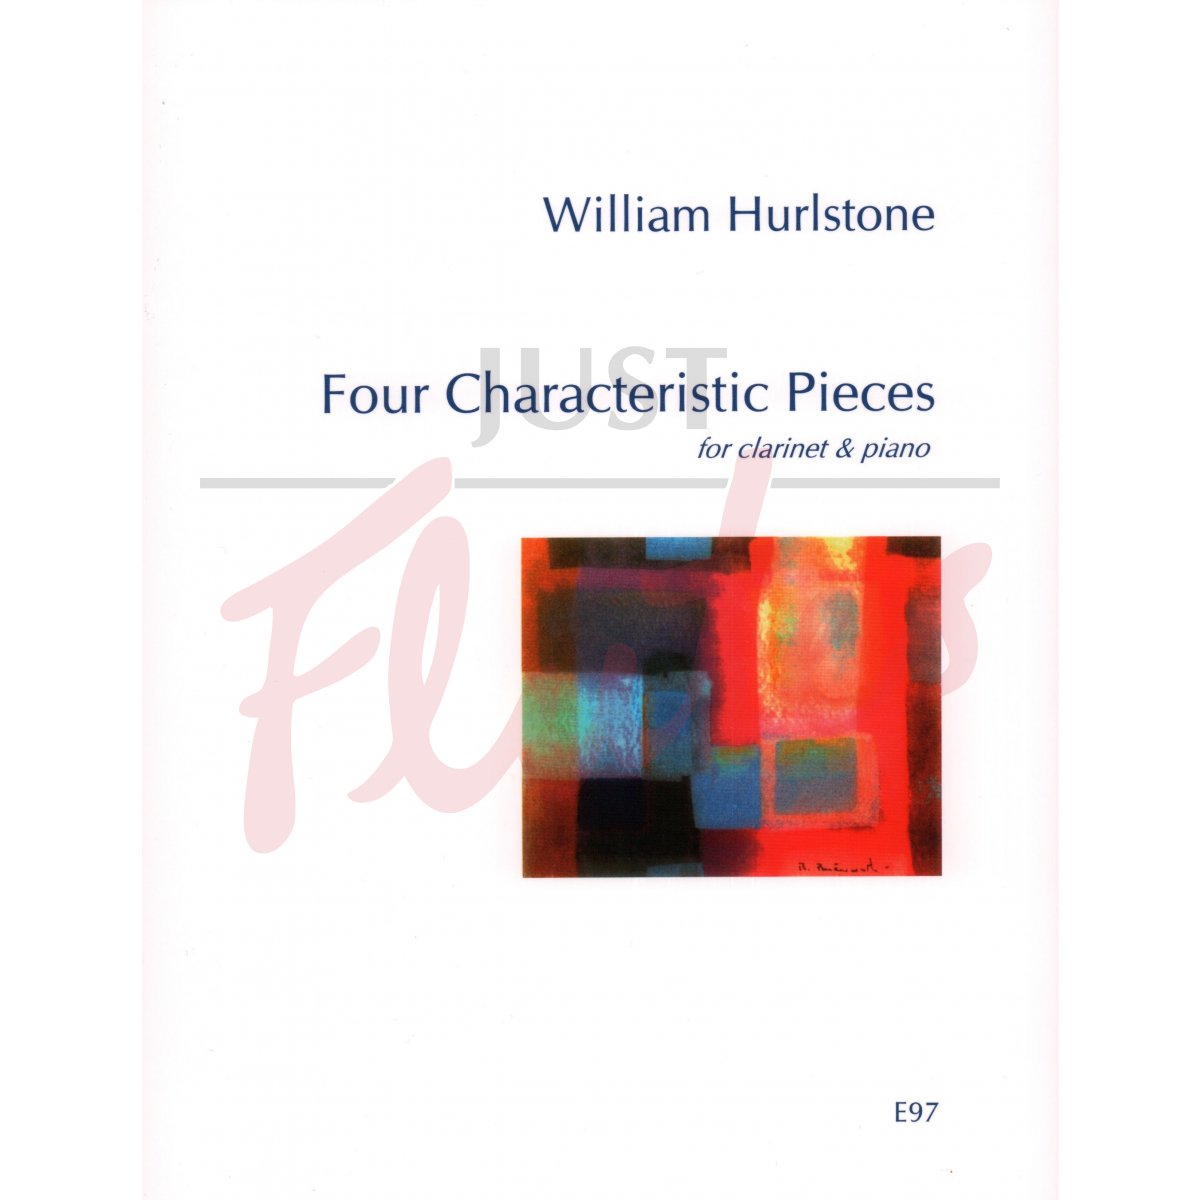 Four Characteristic Pieces for Clarinet and Piano